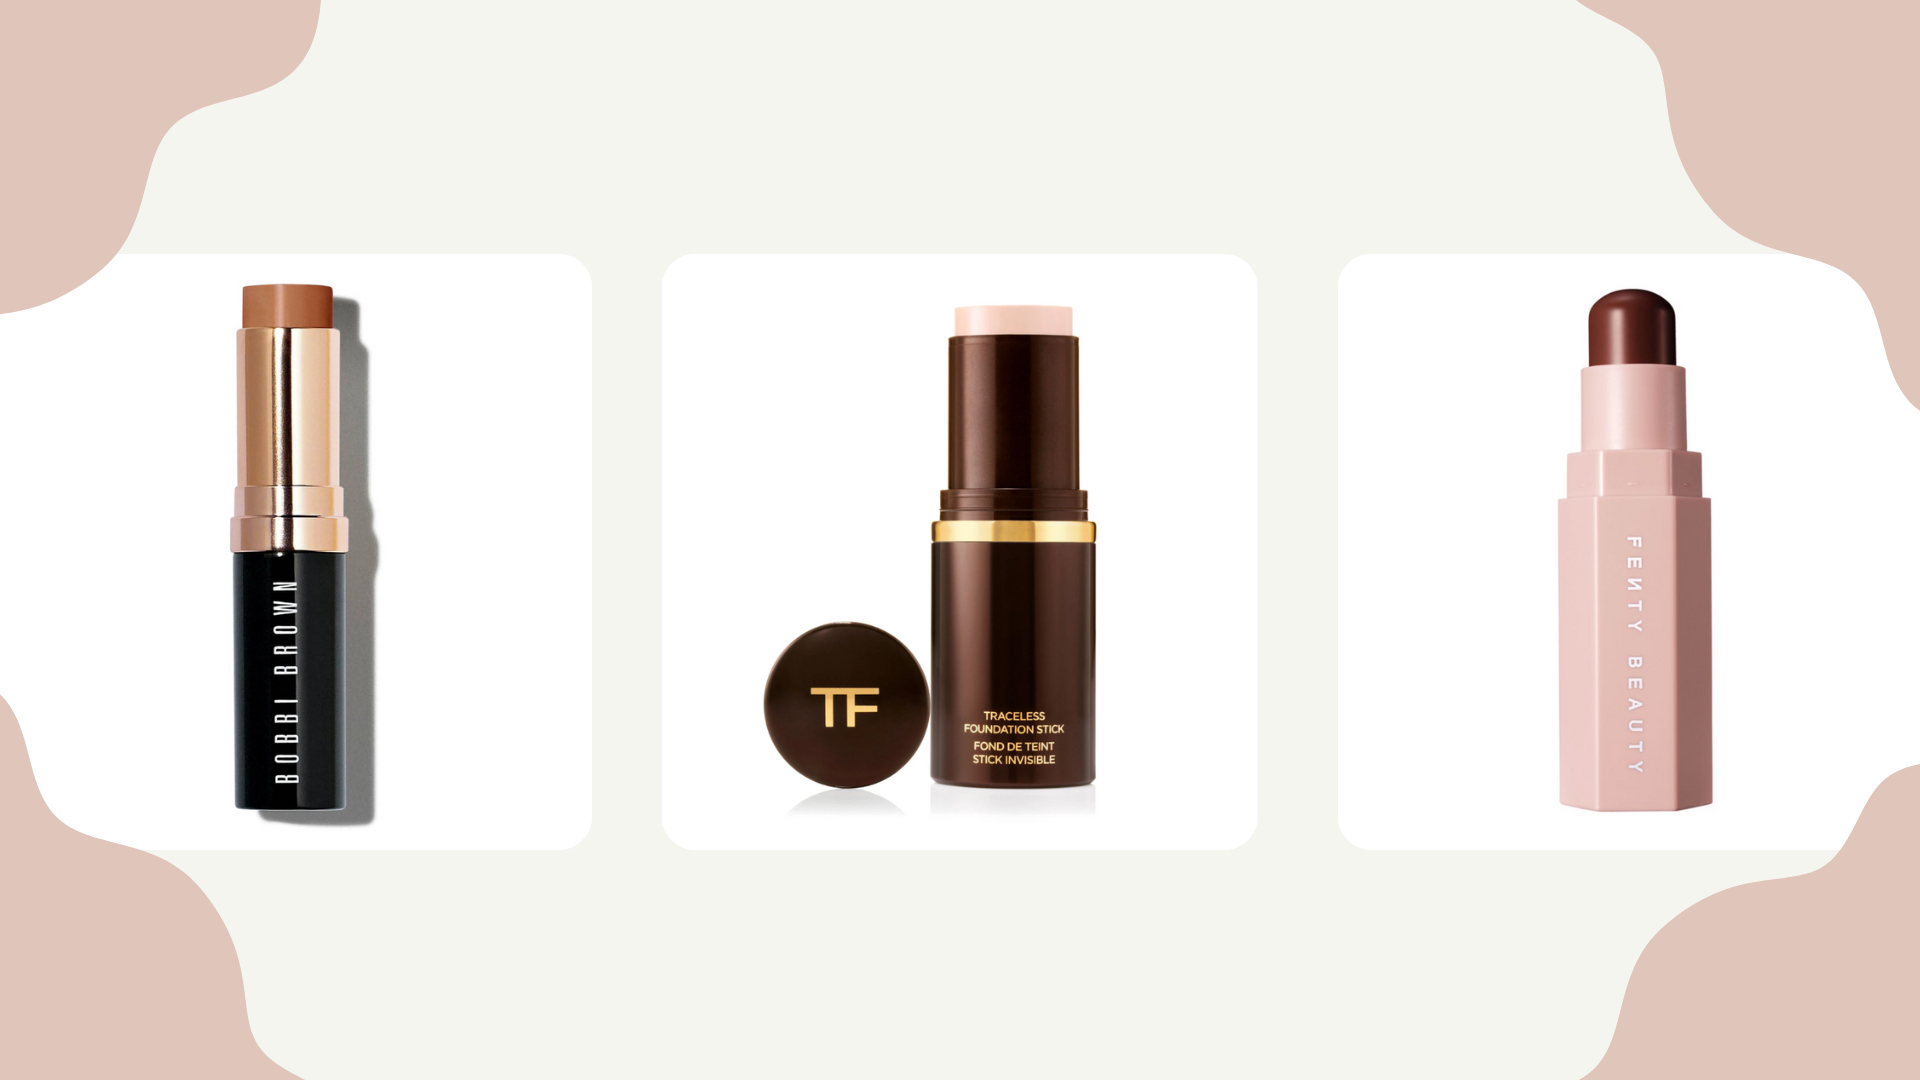 The 11 best foundation sticks for easy, flawless coverage | Woman & Home